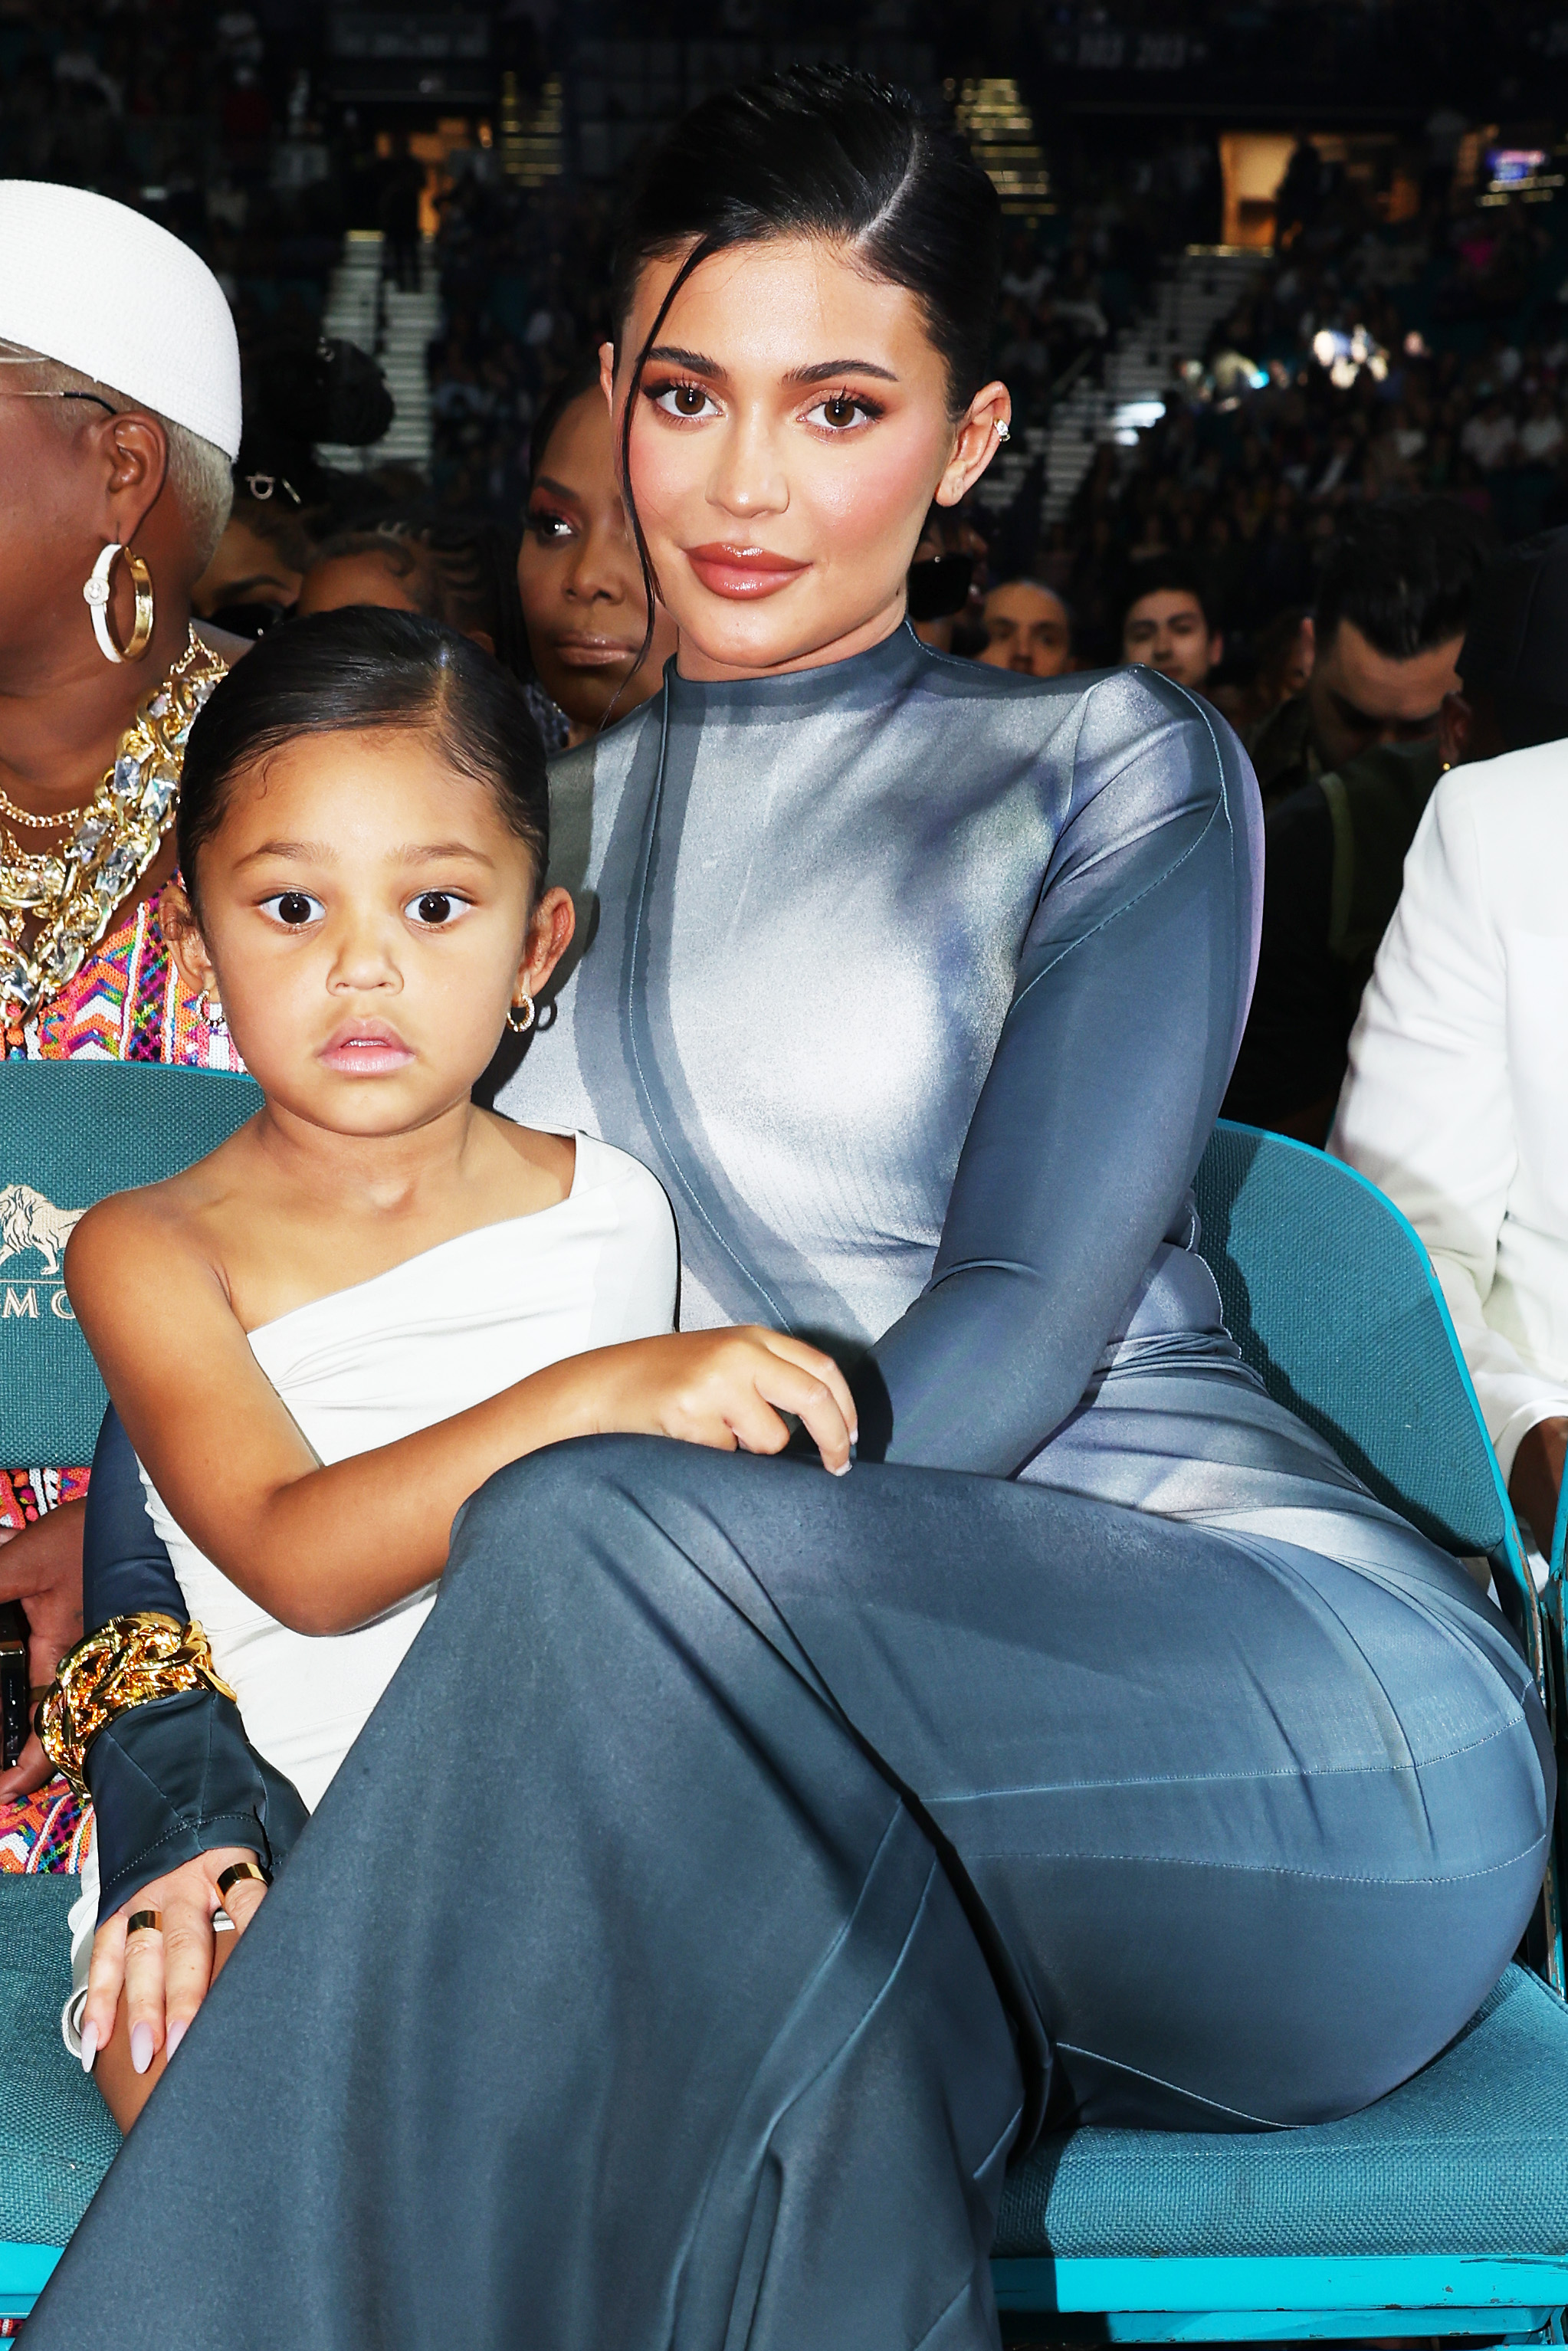 Kylie Jenner often brings Stormi along with her to major events, including the 2022 Billboard Music Awards held at the MGM Grand Garden Arena on May 15, 2022